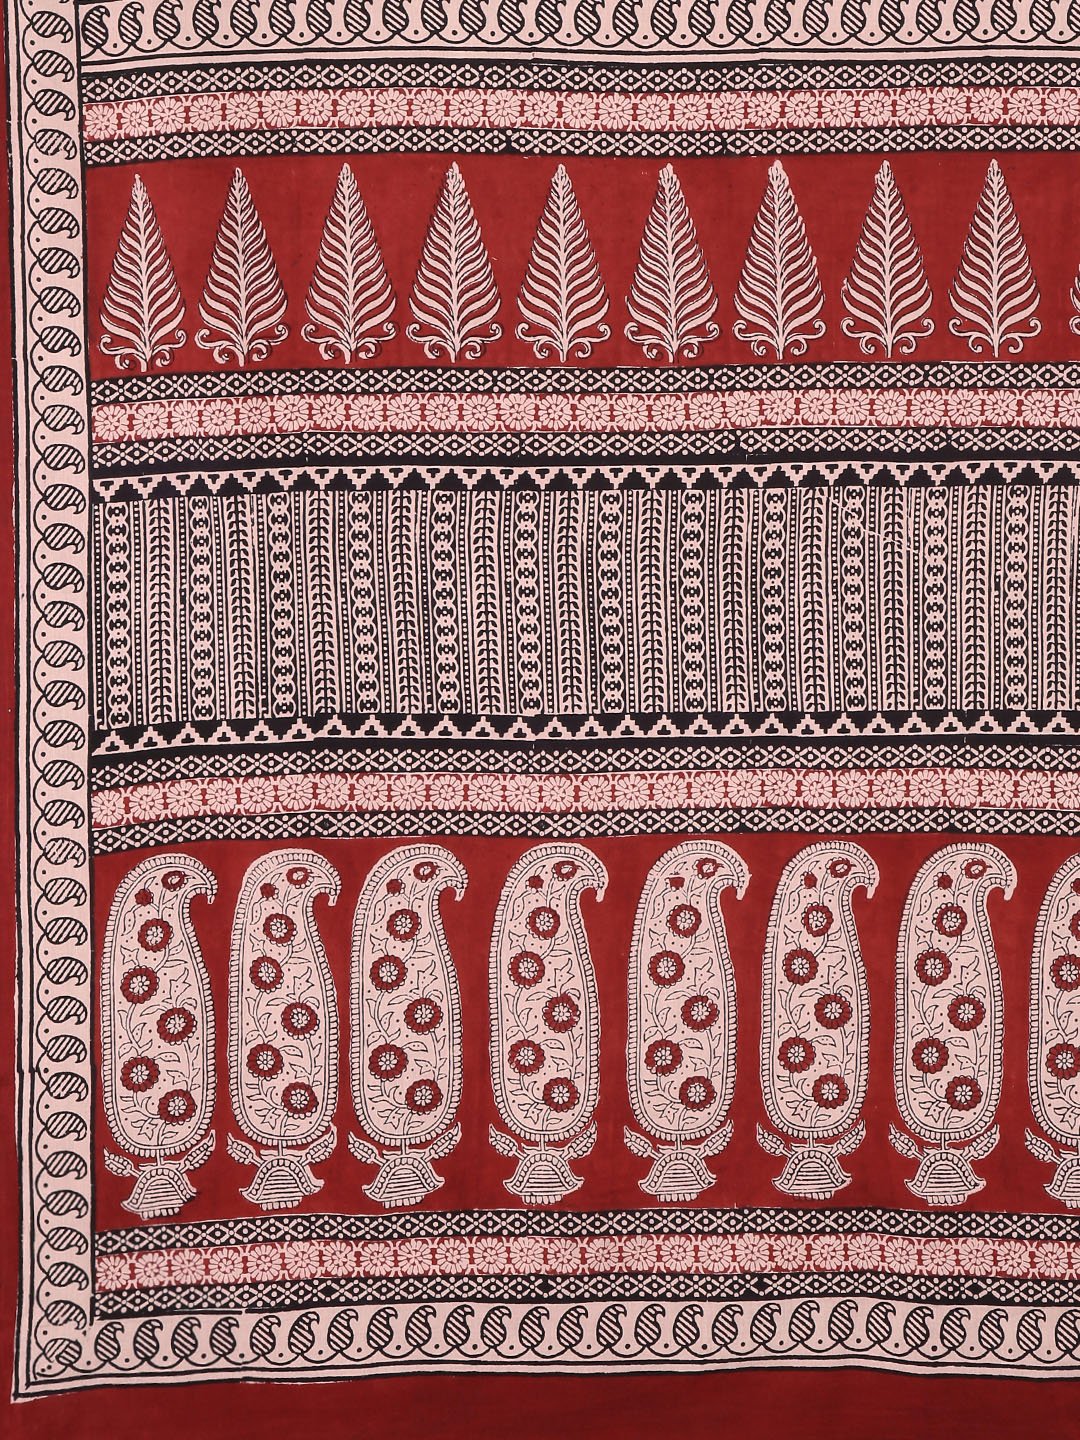 Pink Rust Brown Pure Cotton Handblock Print Saree-Saree-Kalakari India-MYBASA0011-Bagh, Cotton, Geographical Indication, Hand Blocks, Hand Crafted, Heritage Prints, Natural Dyes, Sarees, Sustainable Fabrics-[Linen,Ethnic,wear,Fashionista,Handloom,Handicraft,Indigo,blockprint,block,print,Cotton,Chanderi,Blue, latest,classy,party,bollywood,trendy,summer,style,traditional,formal,elegant,unique,style,hand,block,print, dabu,booti,gift,present,glamorous,affordable,collectible,Sari,Saree,printed, holi,